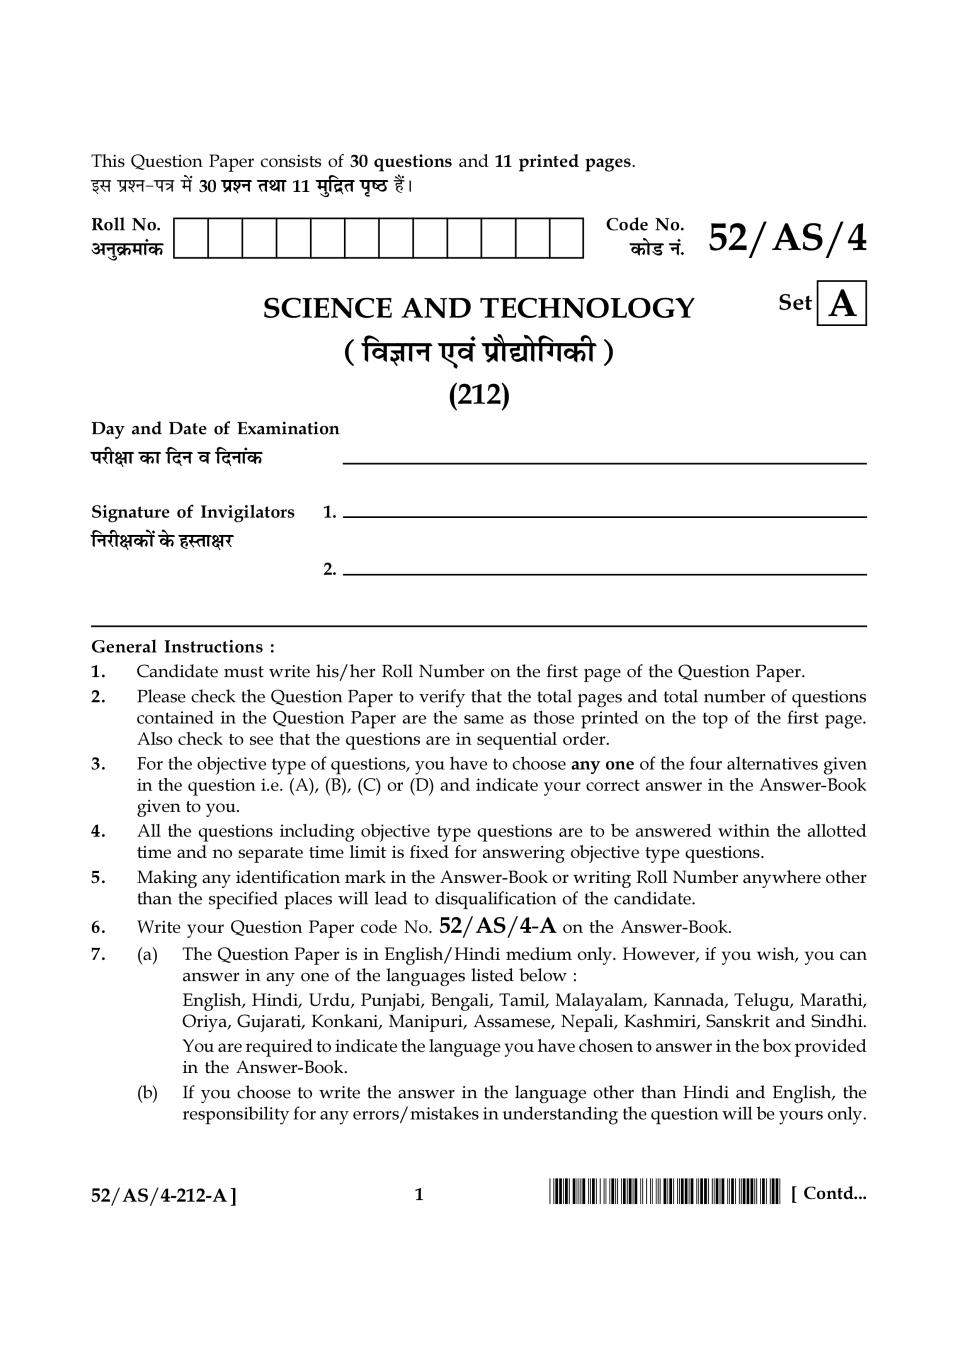 NIOS Class 10 Question Paper Apr 2016 - Science And Technology - Page 1